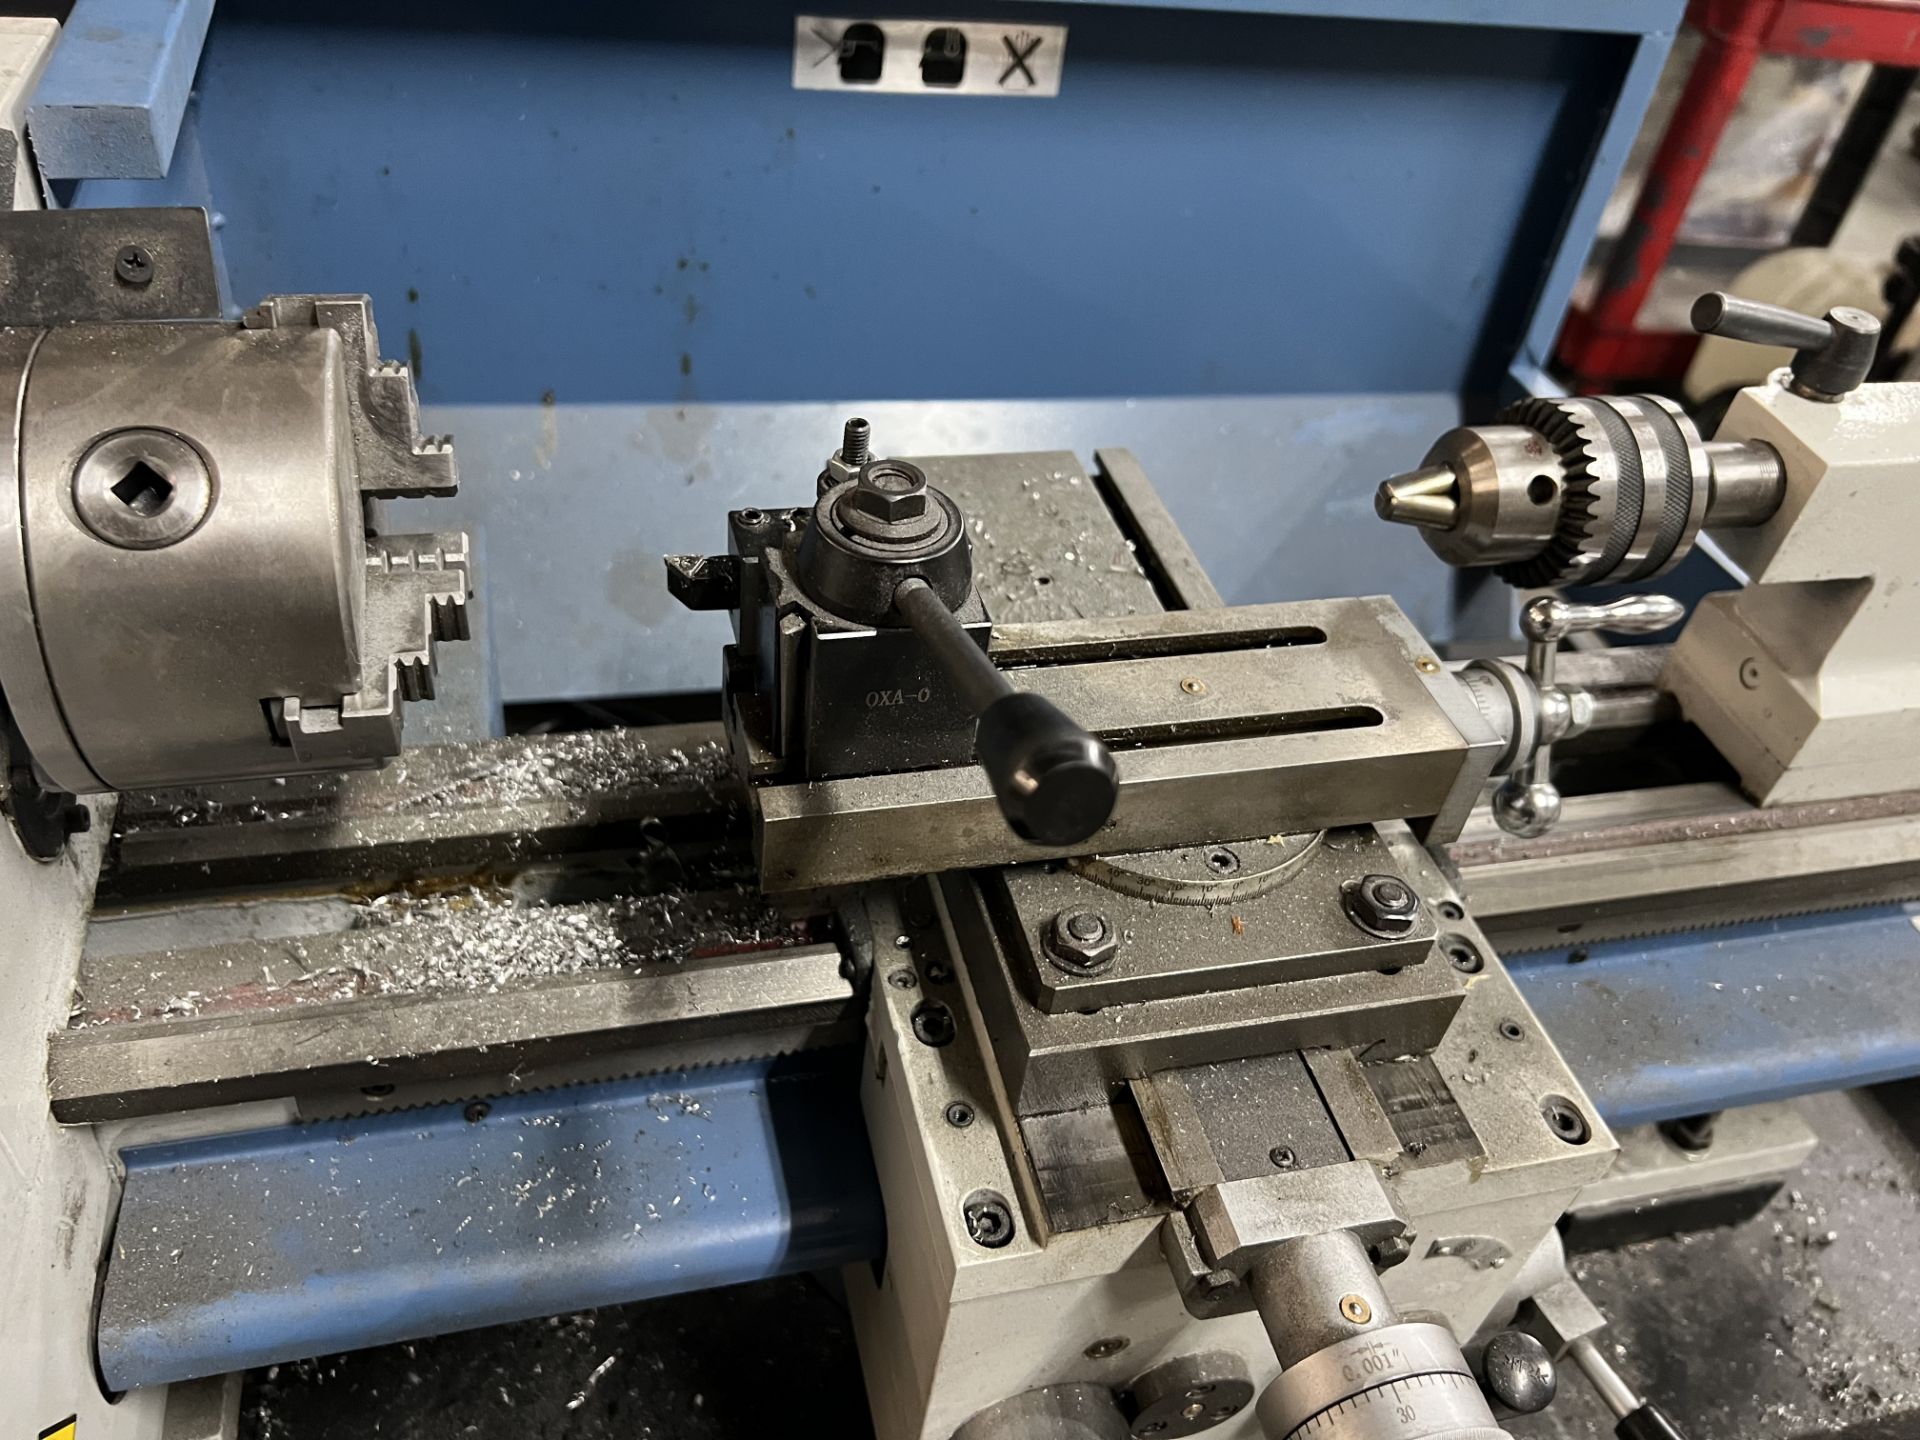 8.5" x 20" LITTLE MACHINE SHOP TOOLROOM ENGINE LATHE, S/N 90157, NEW 2018 - Image 2 of 5